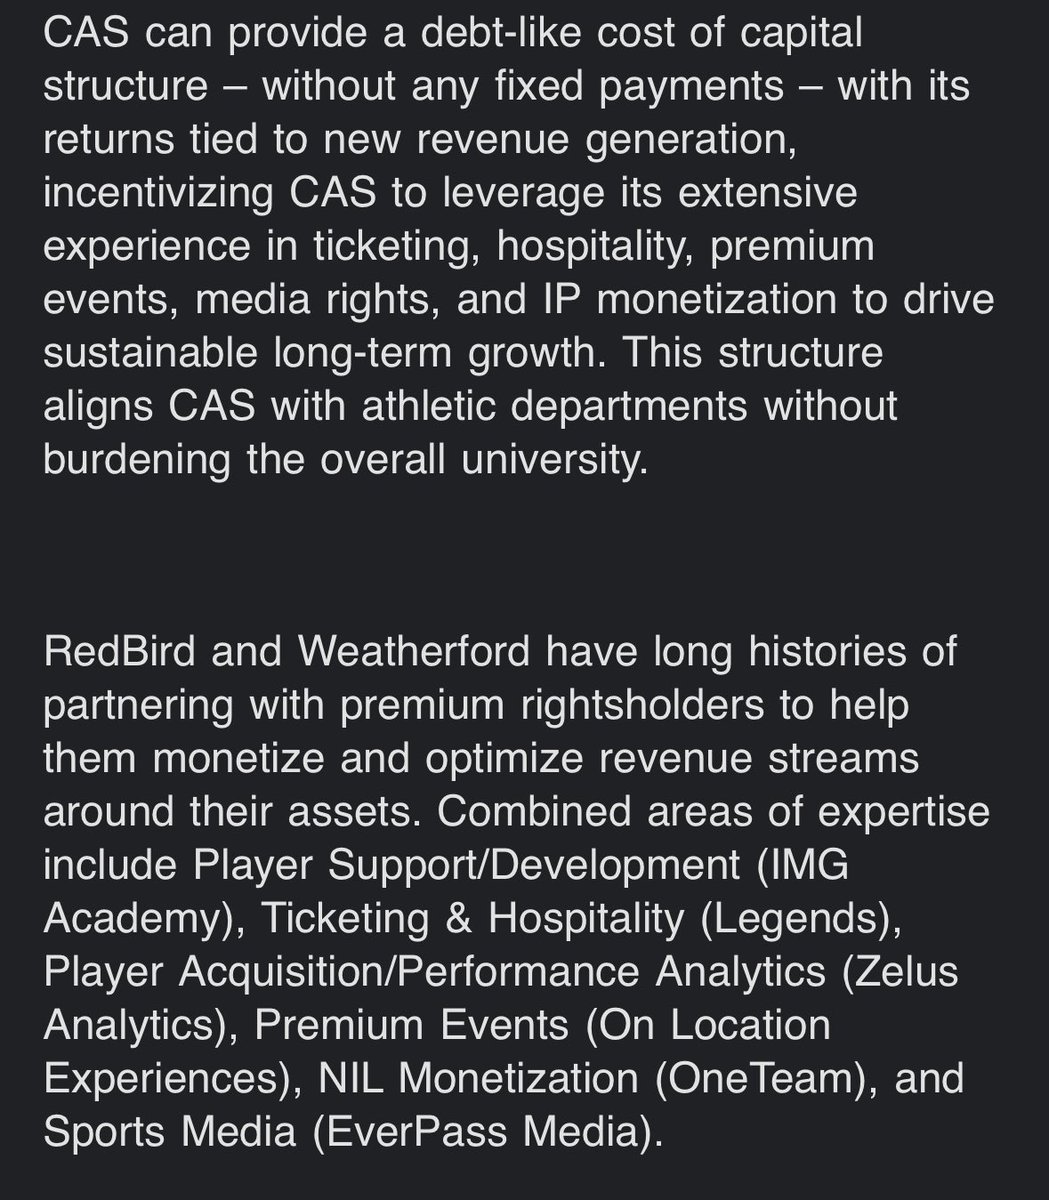 Ready for private capital in college athletics? Former Florida State quarterback Drew Weatherford has partnered with RedBird Capital to form Collegiate Athletic Solutions, “a purpose-driven, dedicated capital and business-building platform for university athletic departments.”